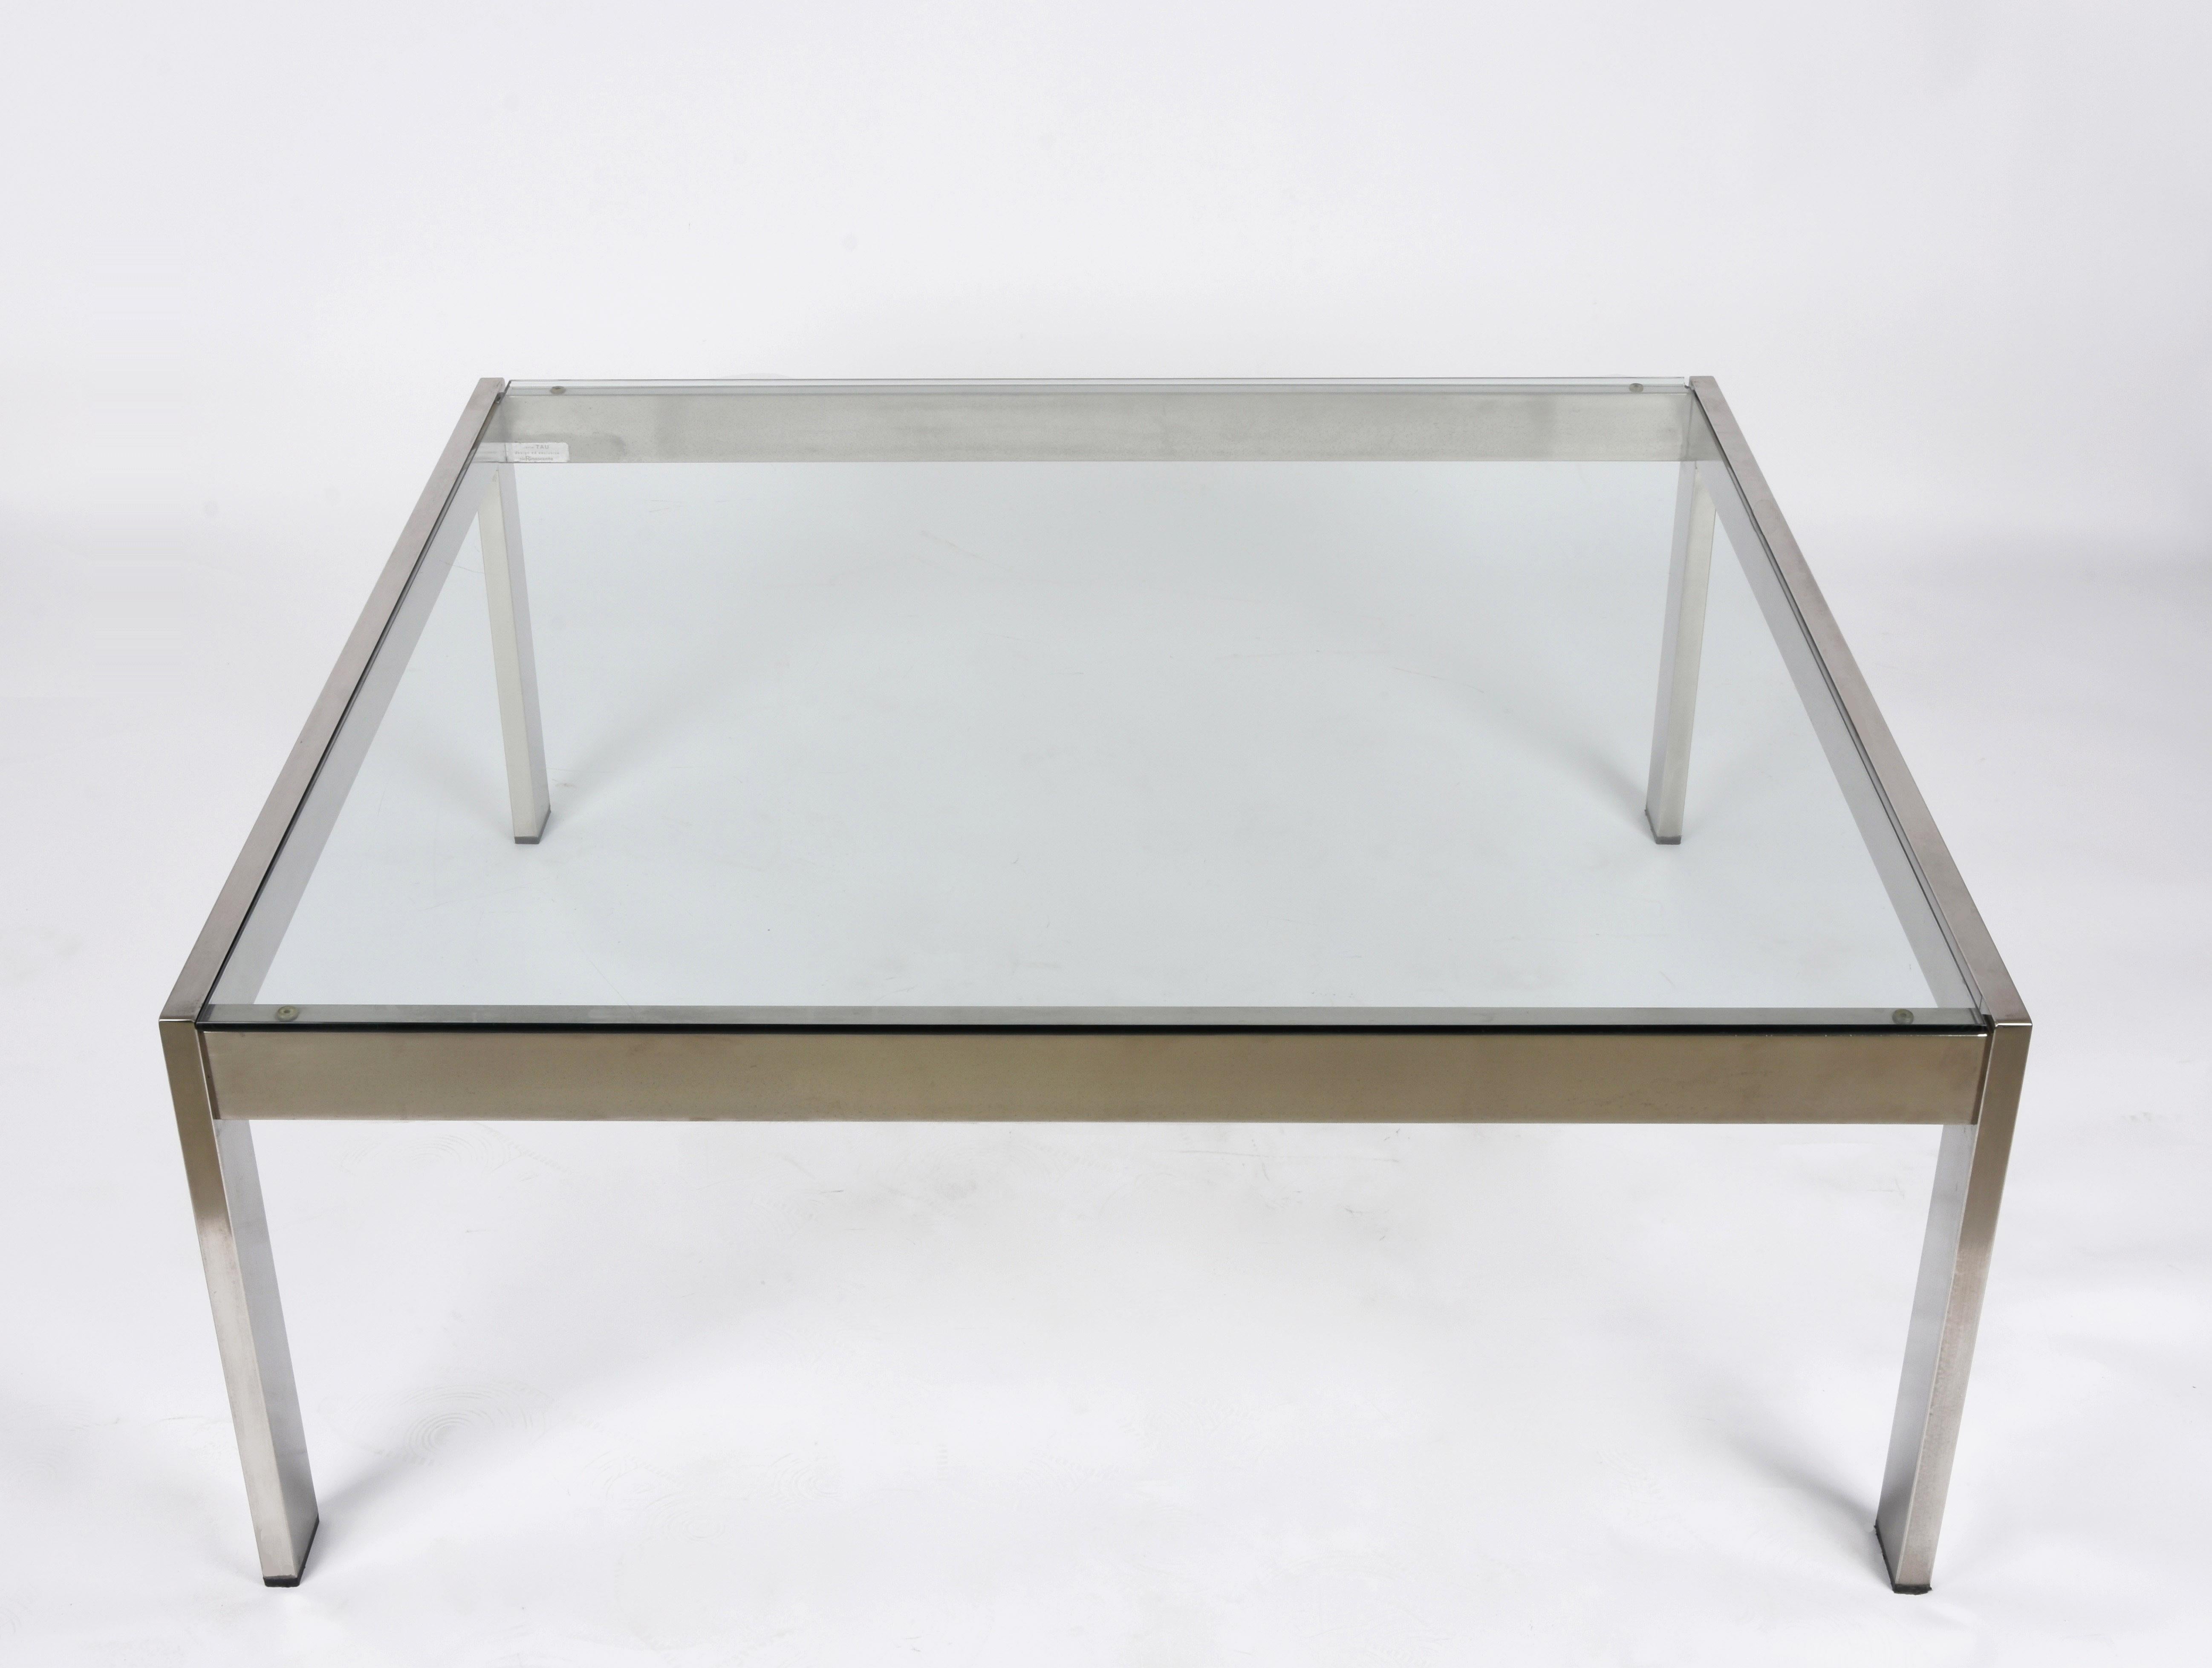 Amazing midcentury crystal glass and enamelled metal coffee table. This fantastic piece was designed in Italy by Gae Aulenti exclusively for La Rinascente Milano during the 1970s.

This wonderful item comes with its original label and makes it